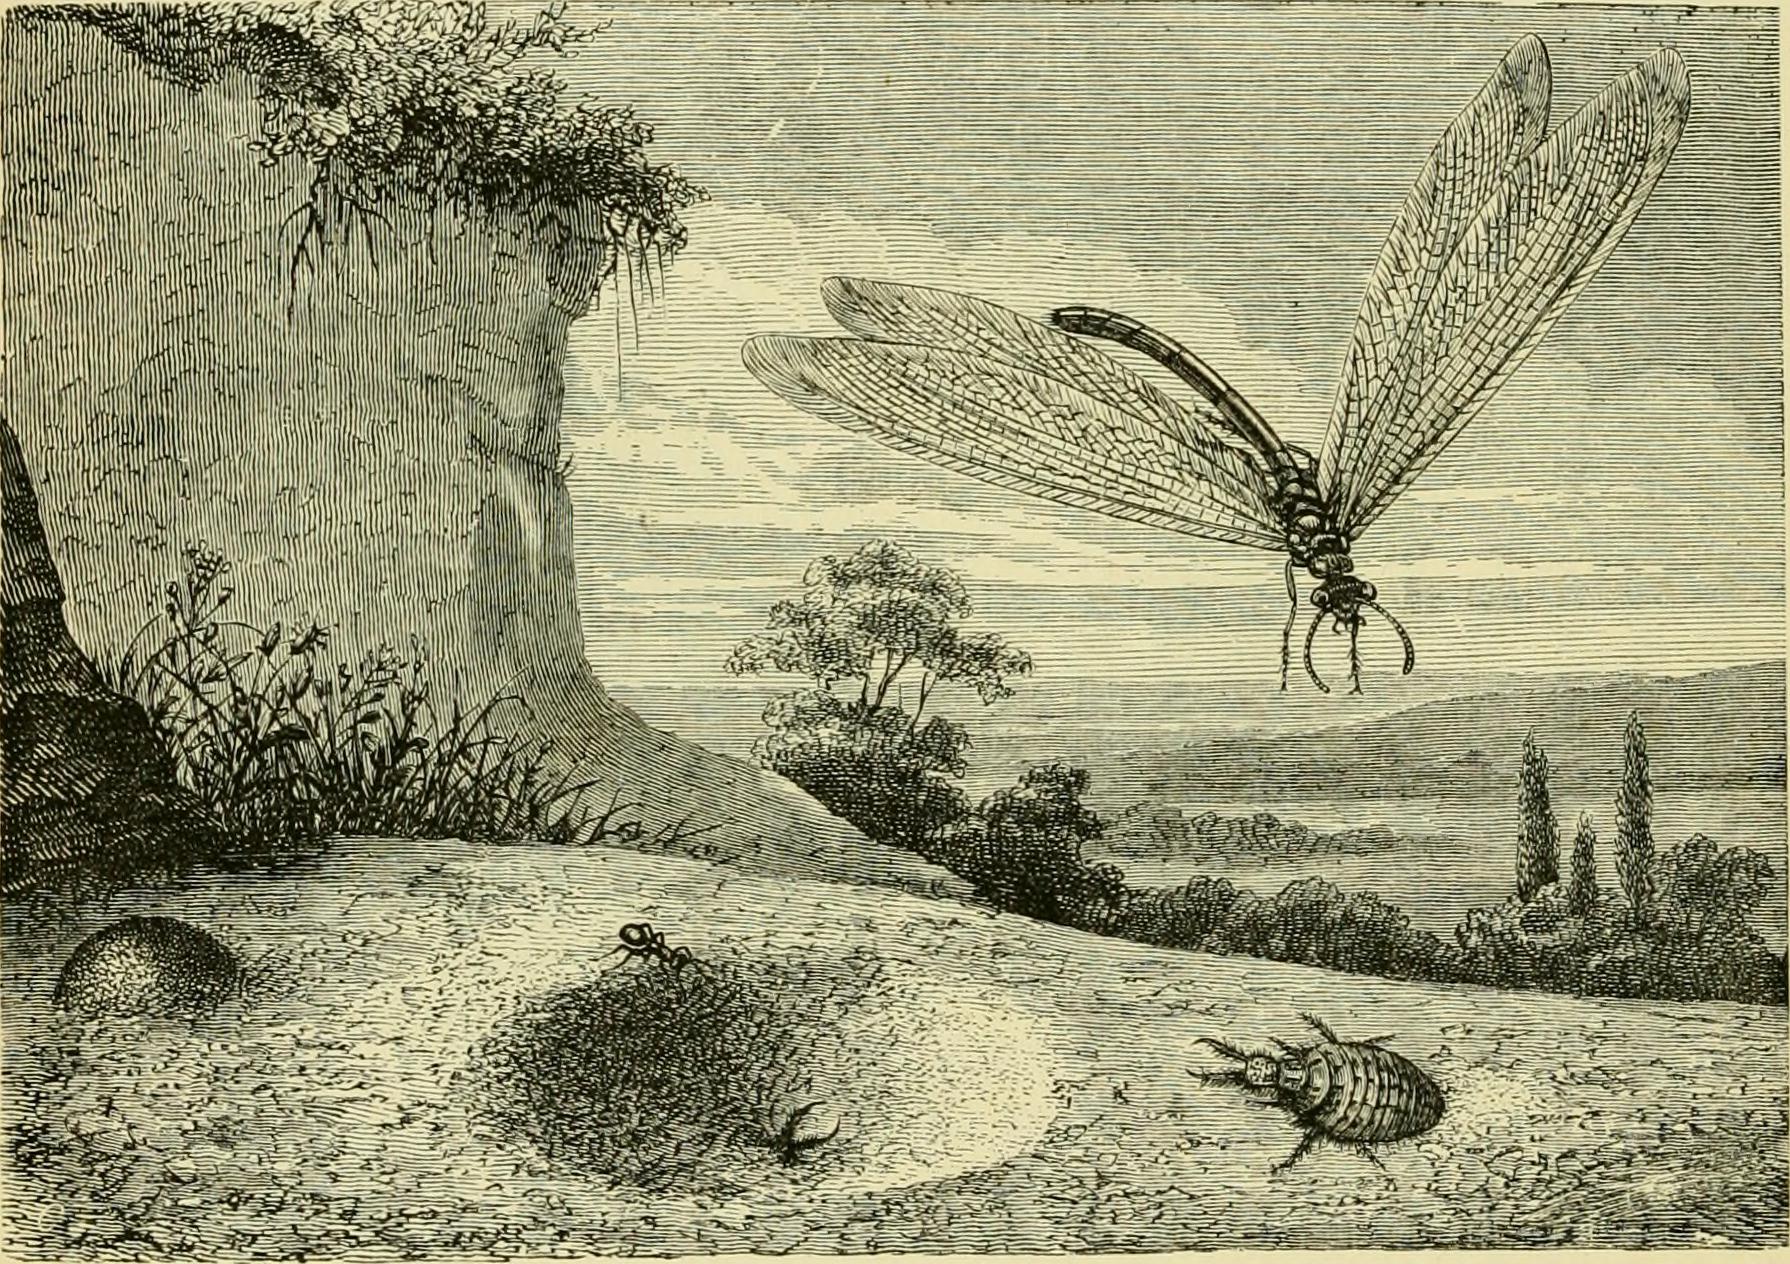 Datei: The transformations (or metamorphoses) of insects (Insecta, Myriapoda, Arachnida, and Crustacea)